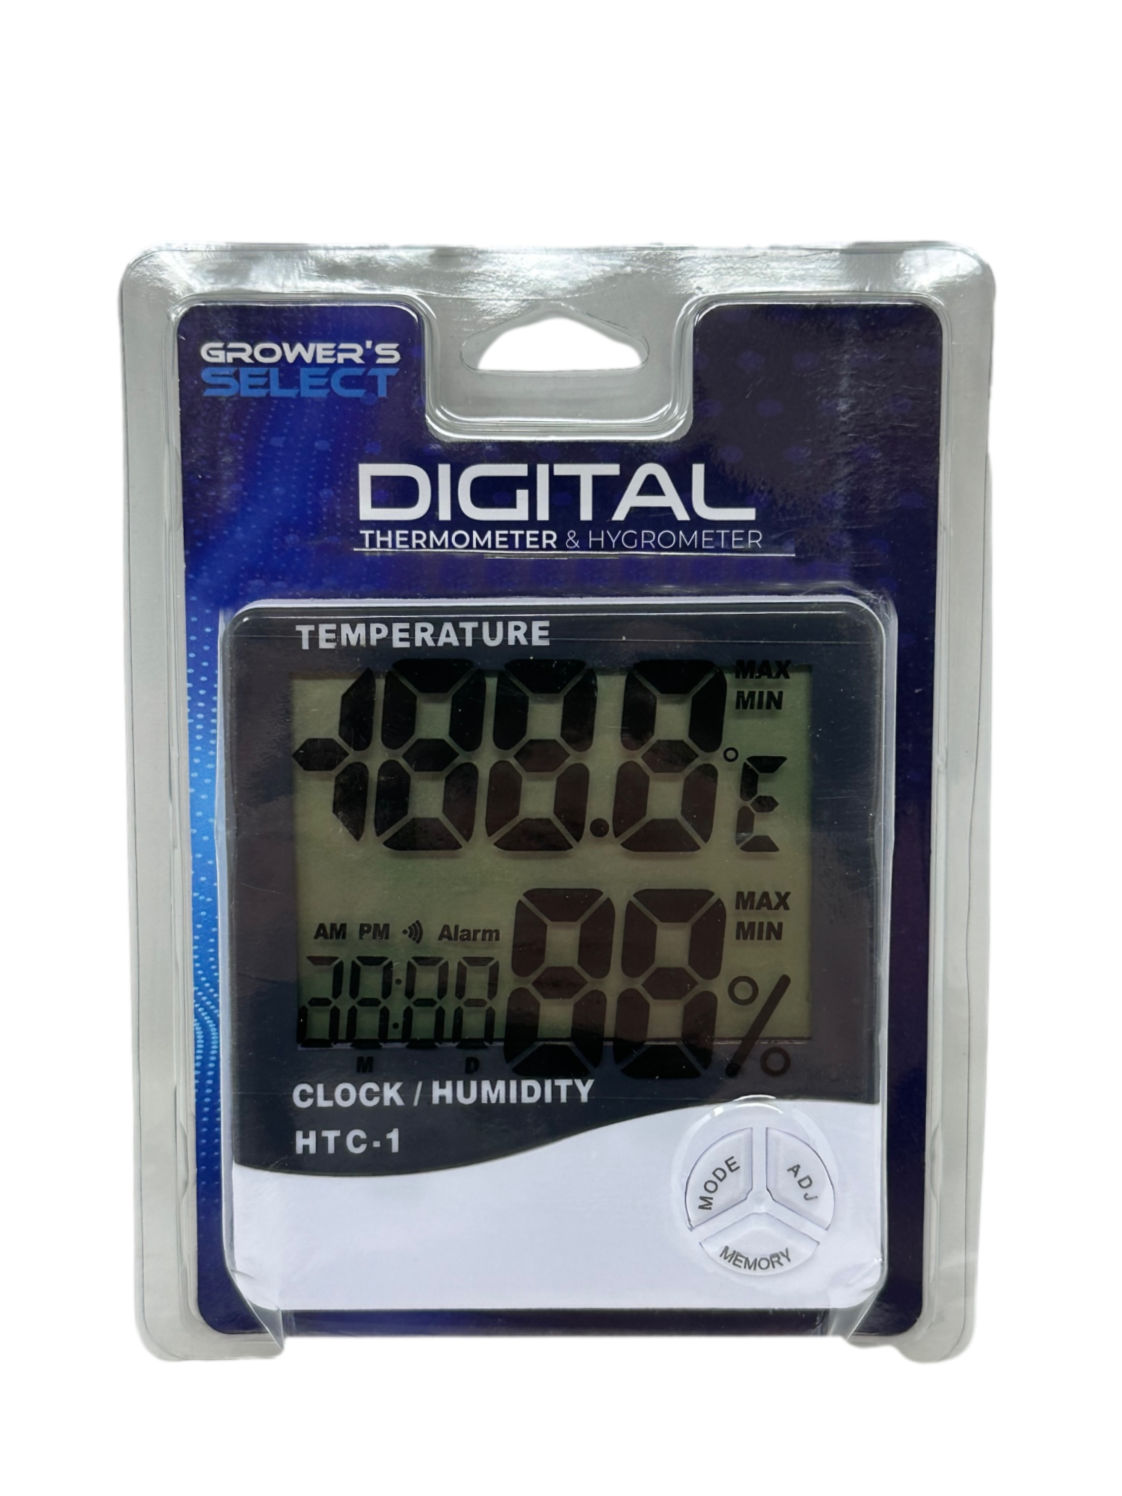 https://www.mycolabs.com/resize/Shared/Images/Product/Digital-Thermometer-Humidity-Meter-HTC-1/Growers_select_thermometer_web.jpg?bw=1000&w=1000&bh=1000&h=1000